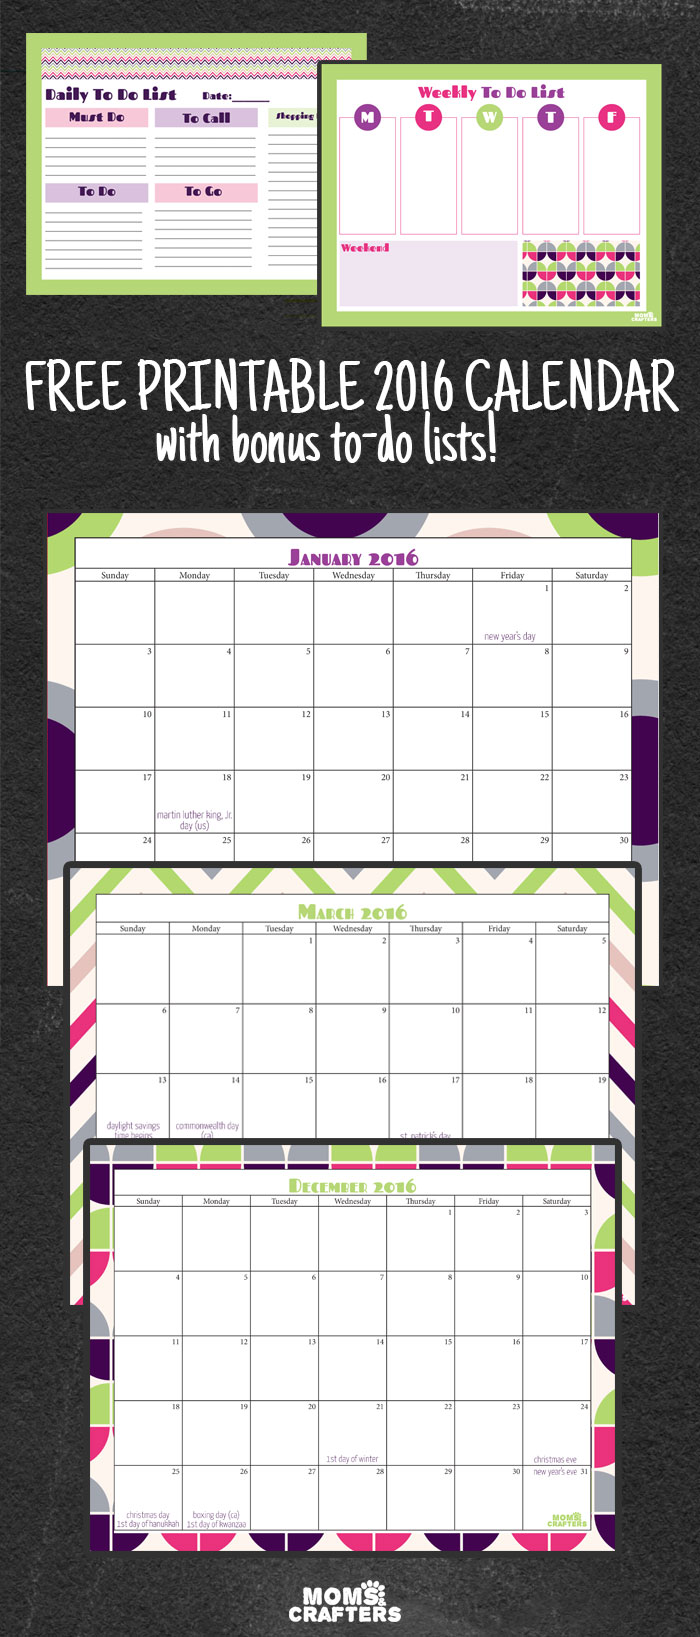 free printable 2016 calendar moms and crafters